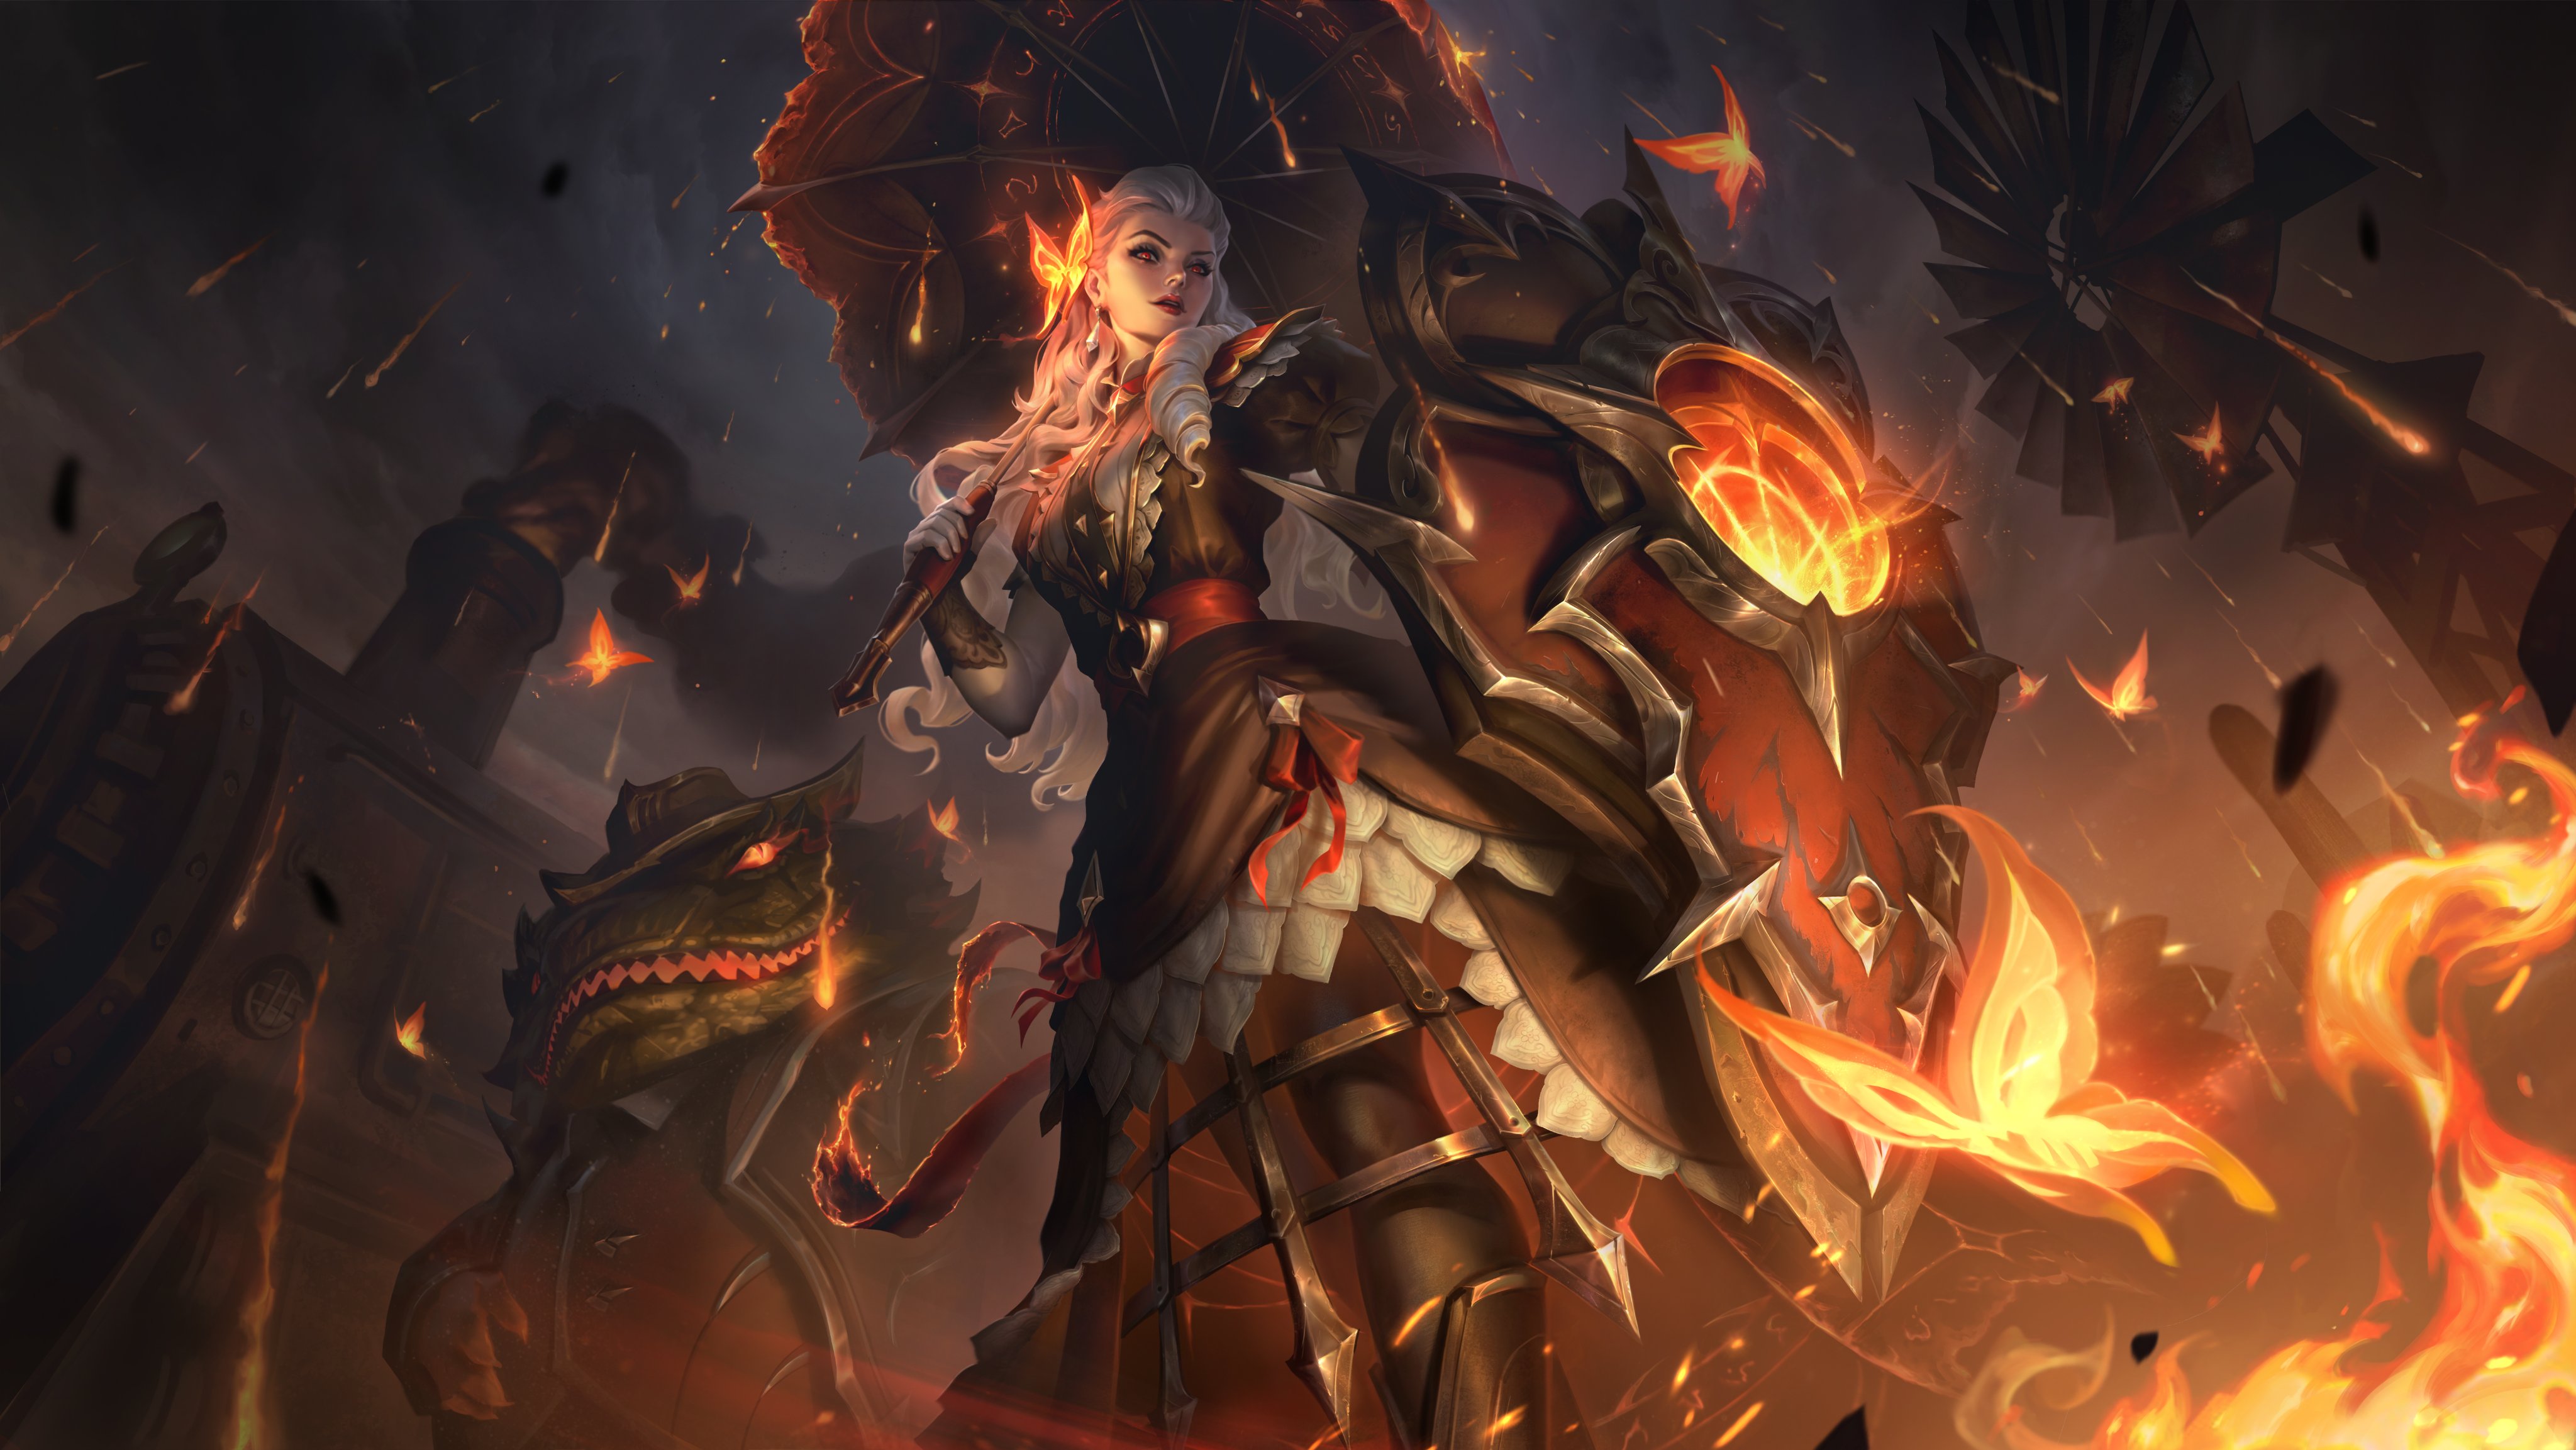 General 4096x2305 High Noon Leona (League of Legends) League of Legends artwork Tahm Kench (League of Legends)